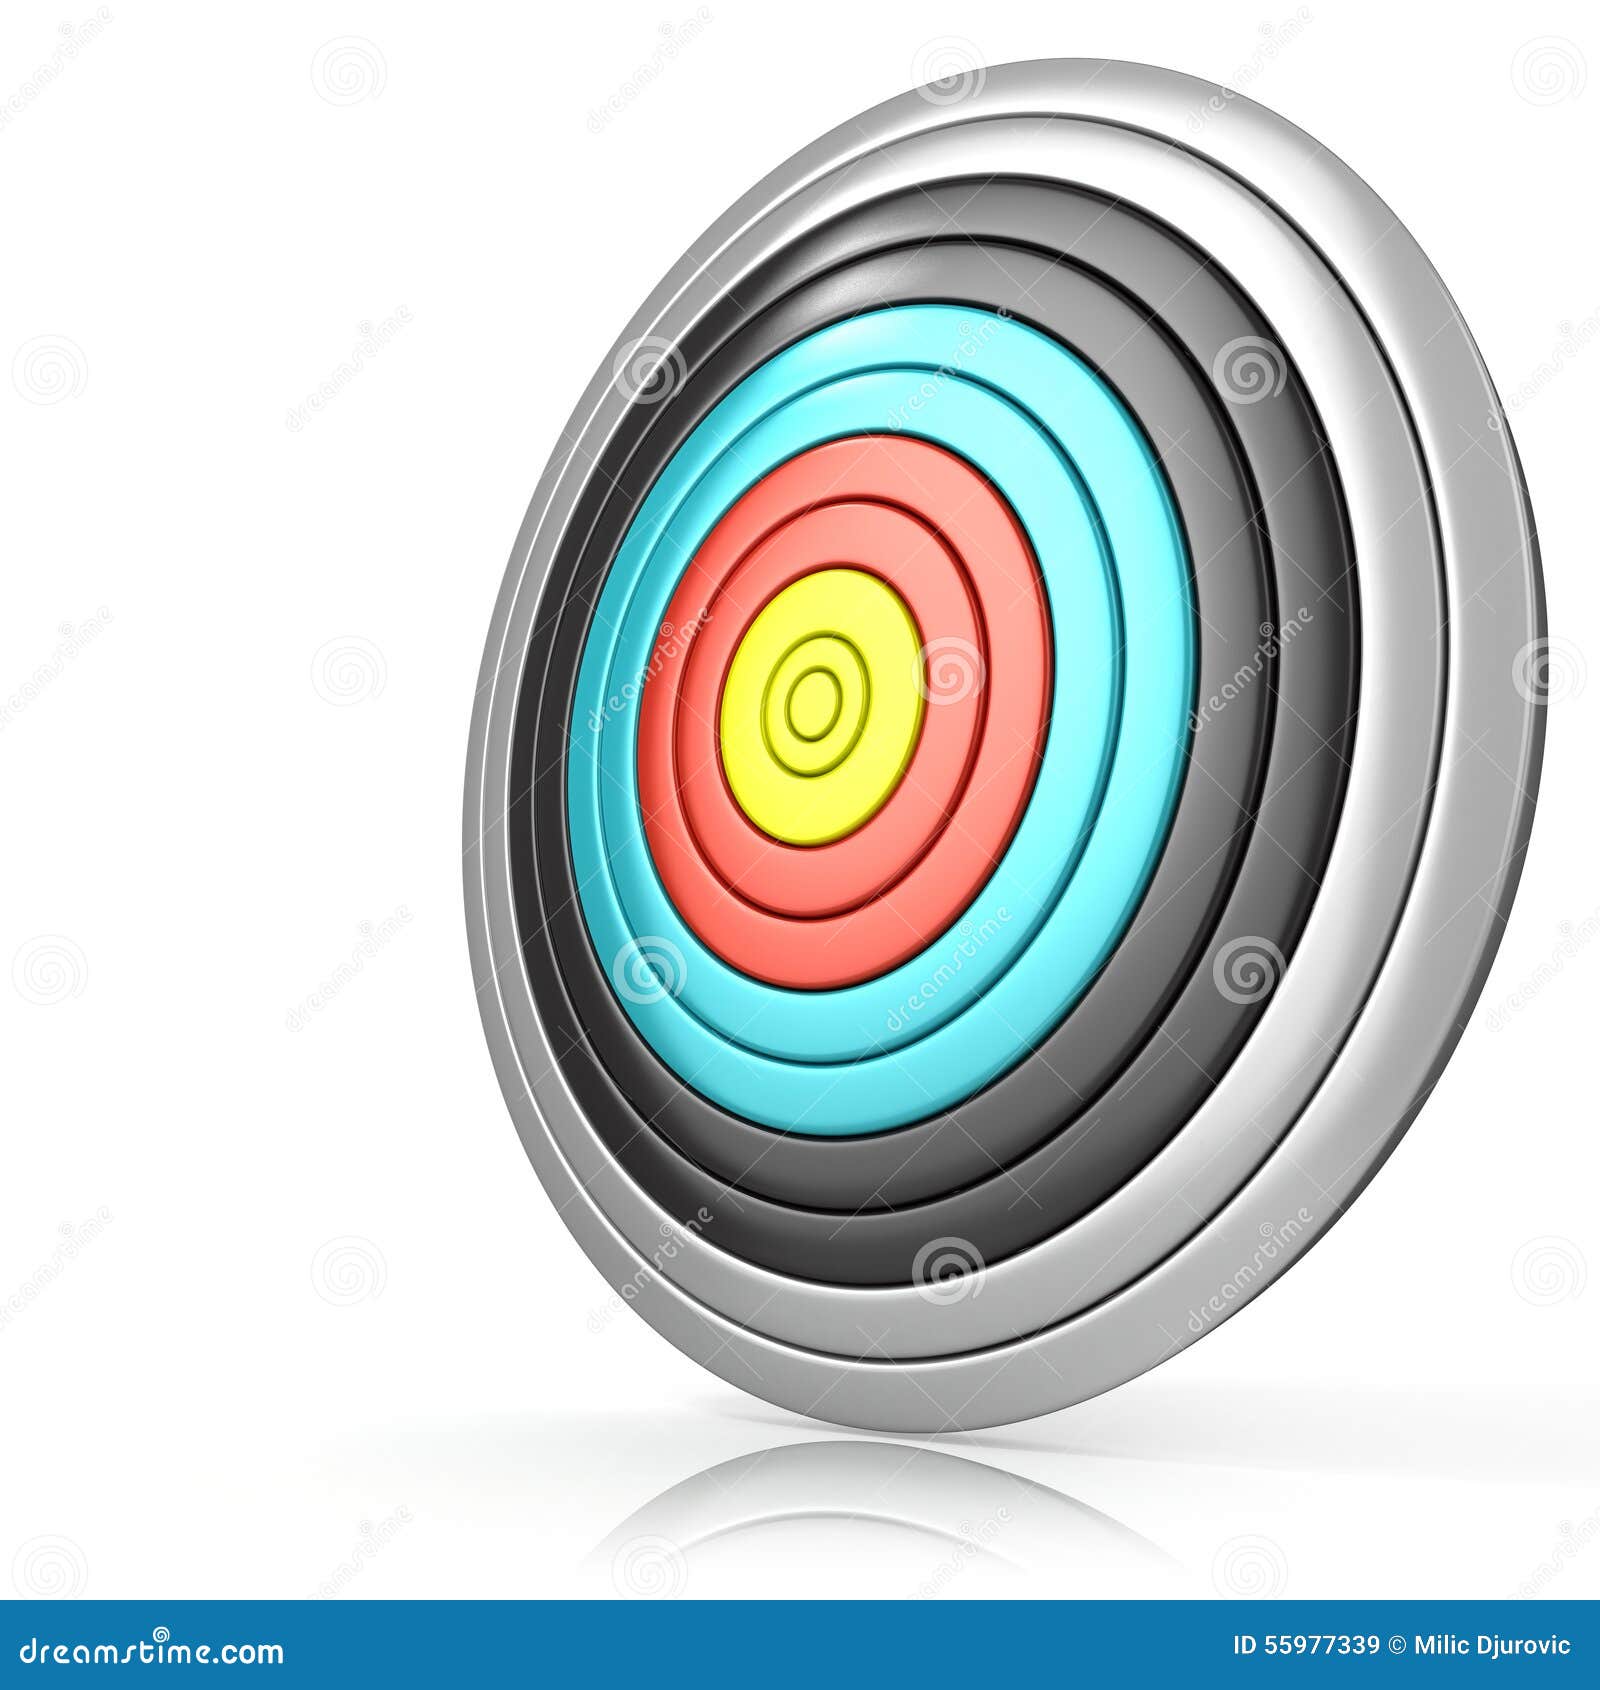 animated target clipart - photo #31